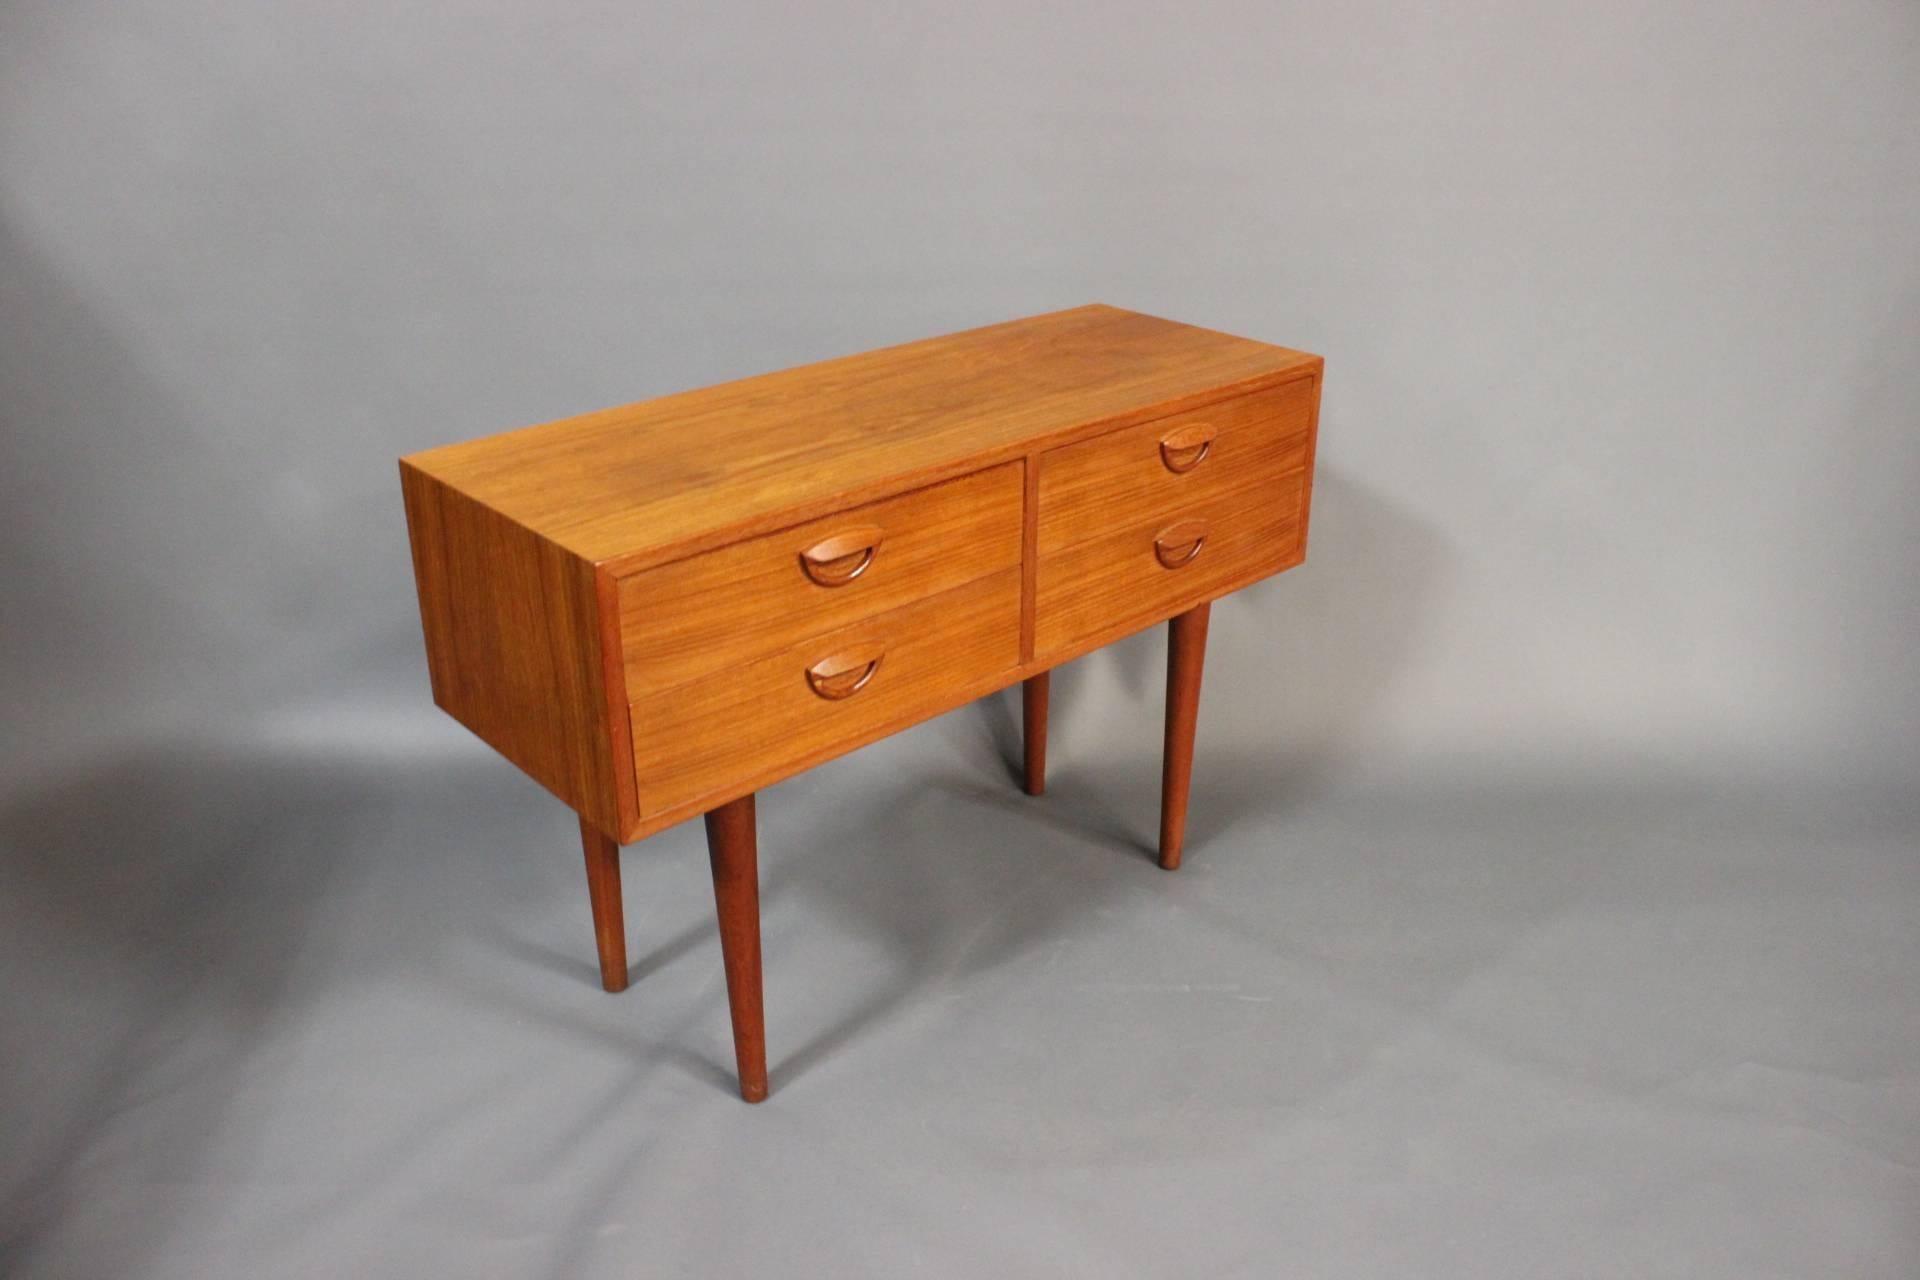 FM chest of drawers in teak with four drawers designed by Kai Kristiansen and manufactured by Feldballes Furniture factory around the 1960s. 